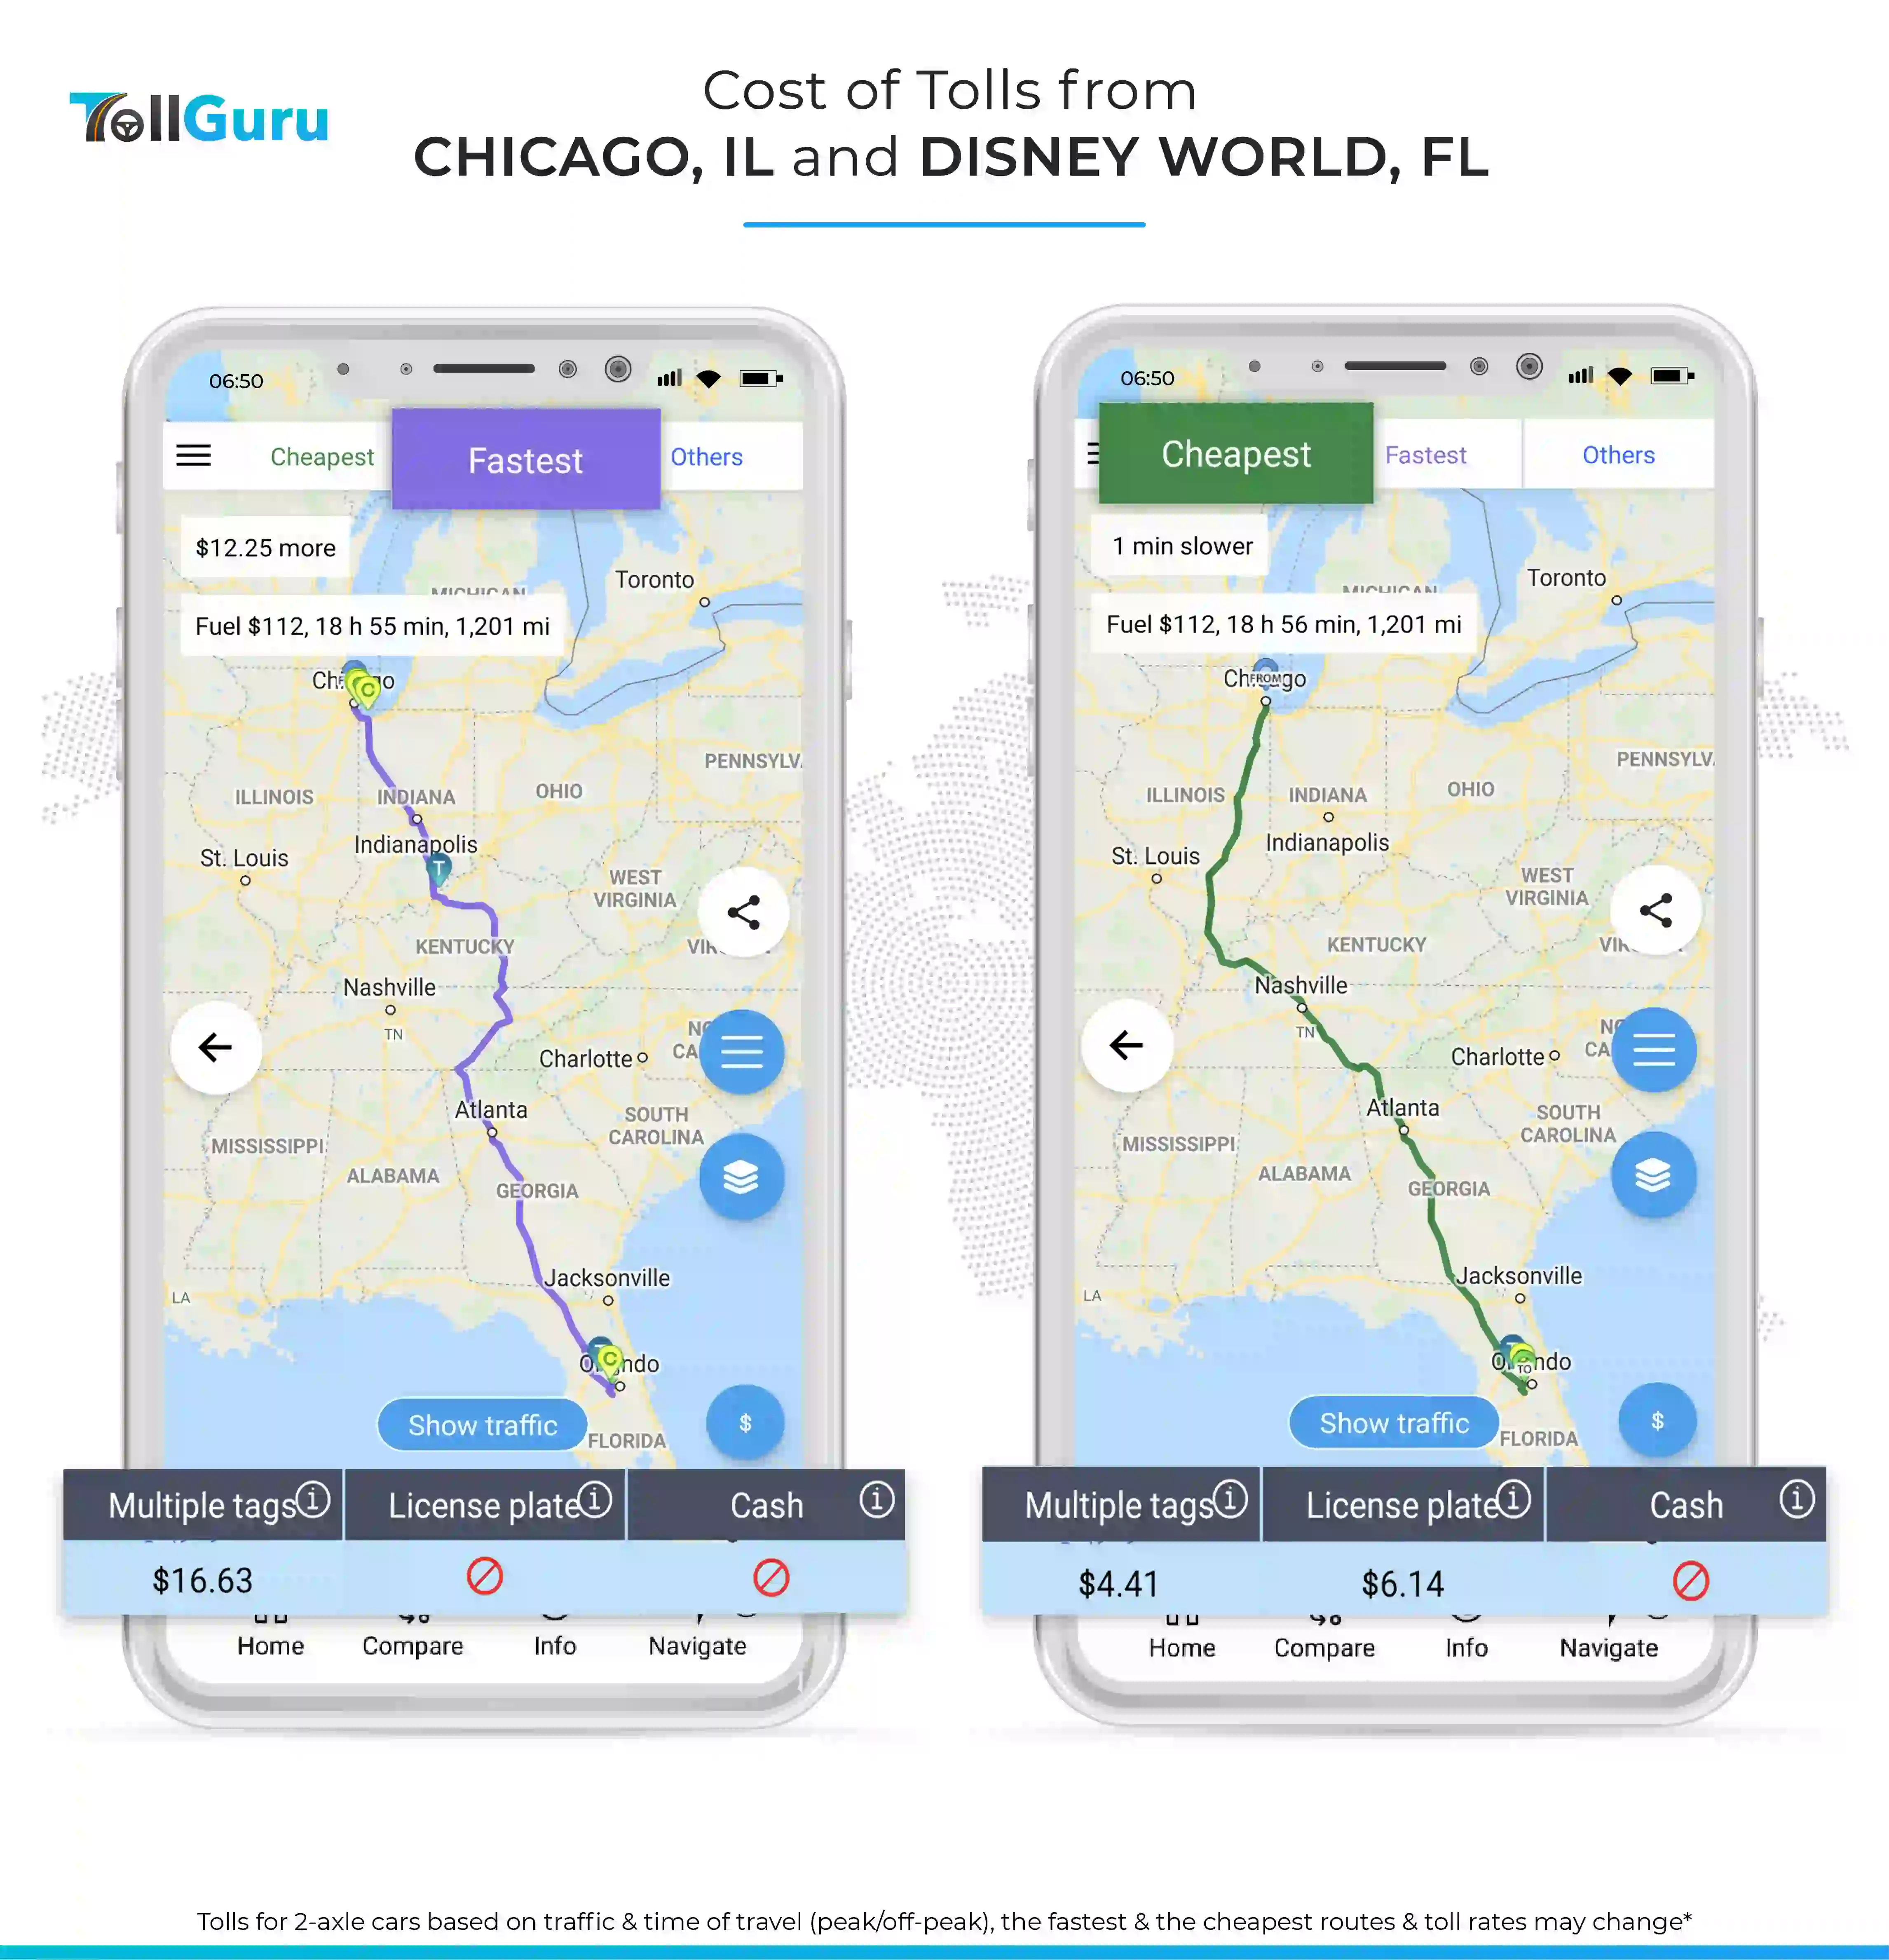 Tolls and fuel cost to travel by car from Chicago to Disney World, FL along typical fast route and cheap route.